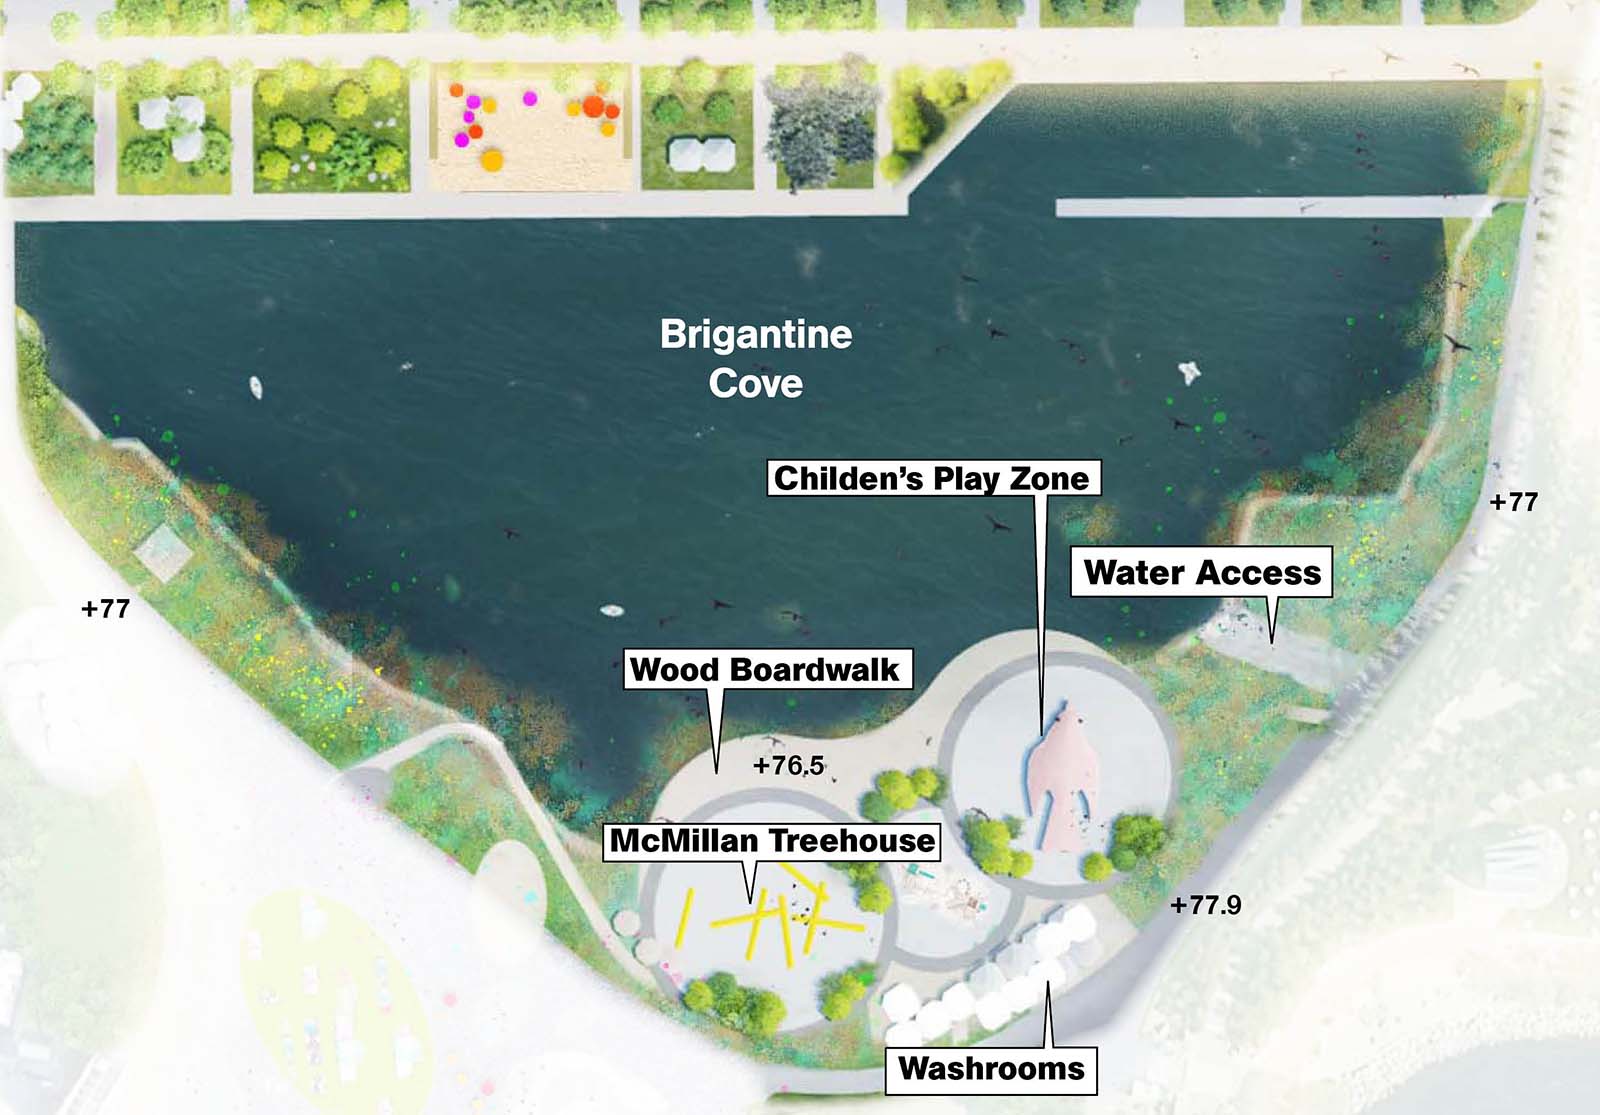 Rendered image of brigantine cove showing a wood boardwalk along the water with water access to the east. Inland from the boardwalk is a McMillan Treehouse, a children’s play zone and washrooms.